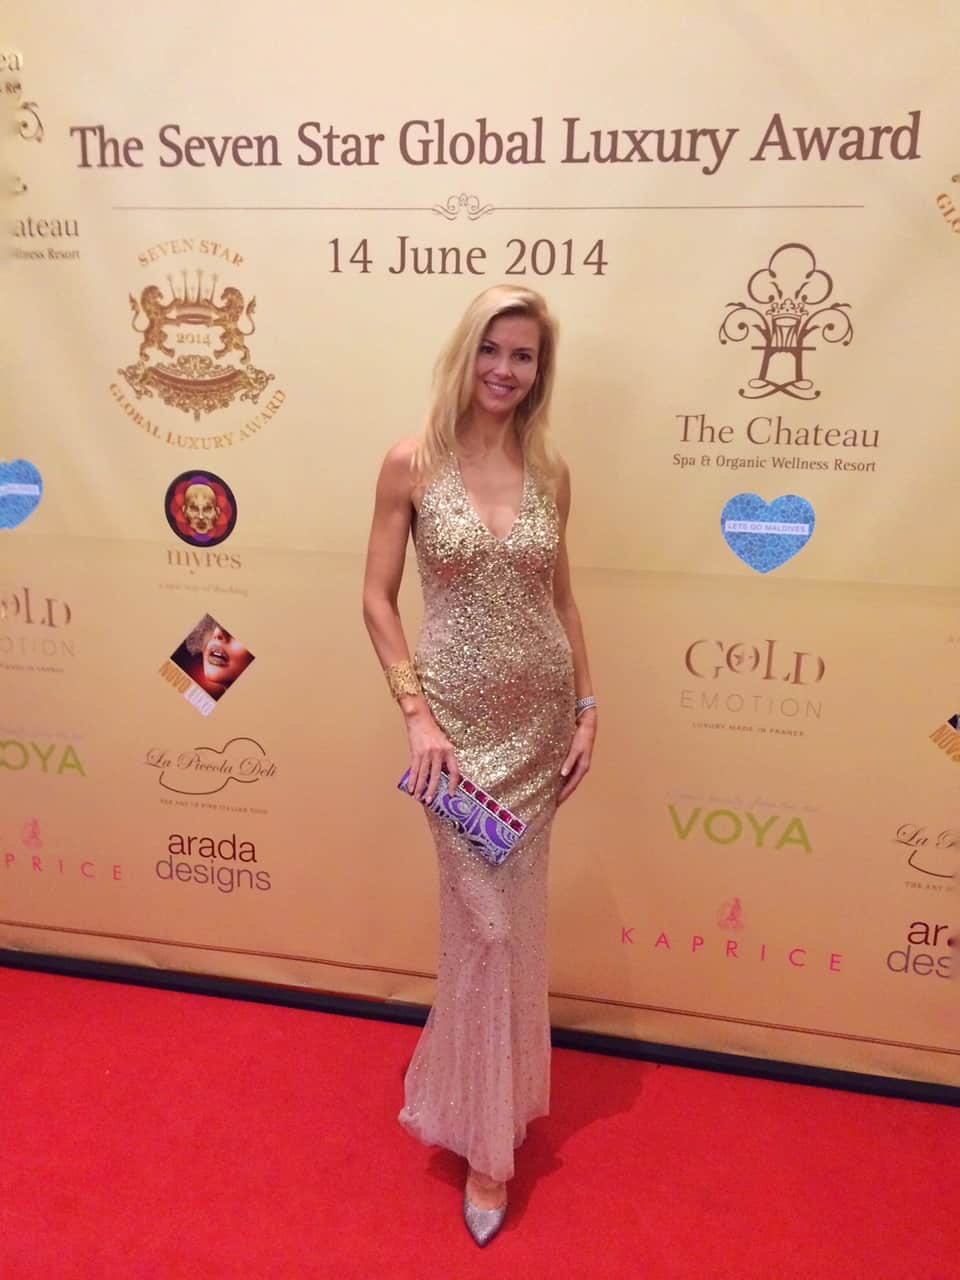 The Lux Traveller at The Seven Star Global Luxury Award in 2014